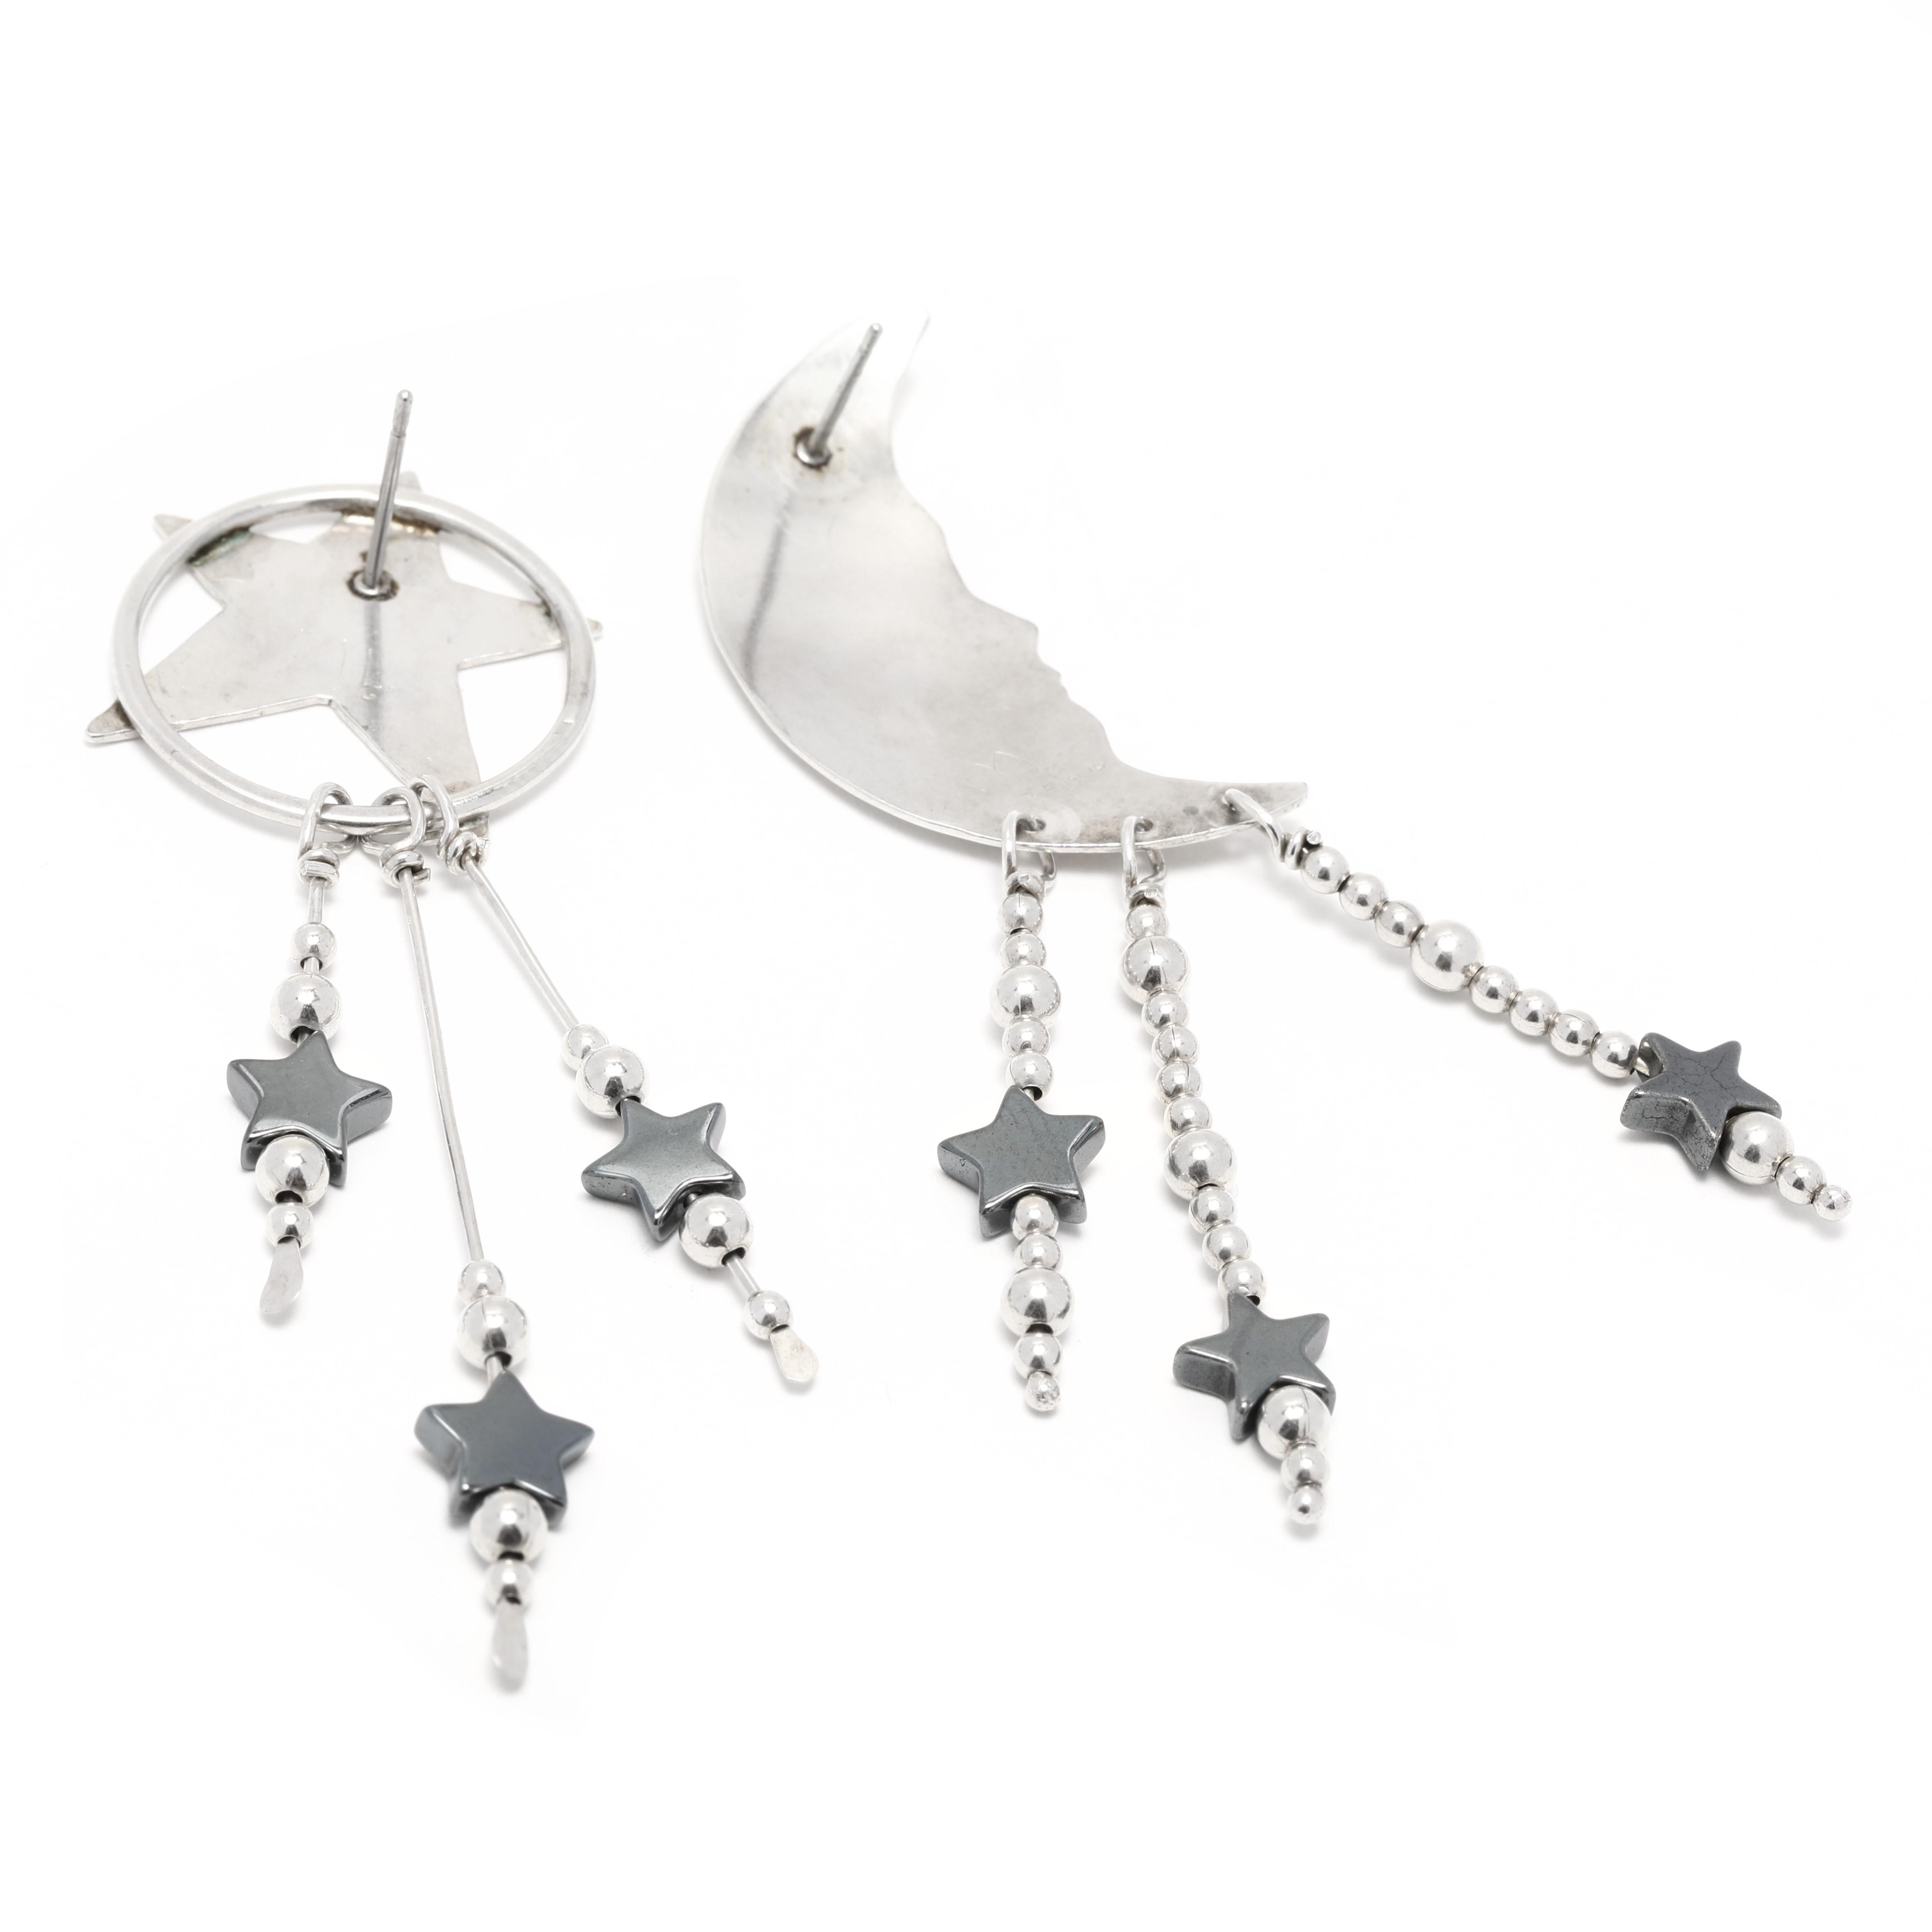 These Crescent Moon and Stars Hematite Large Dangle Sterling Silver Earrings make a stunning statement! Crafted from sterling silver and hematite, these earrings feature a crescent moon and five stars dangle from a hoop. With a length of 2.75